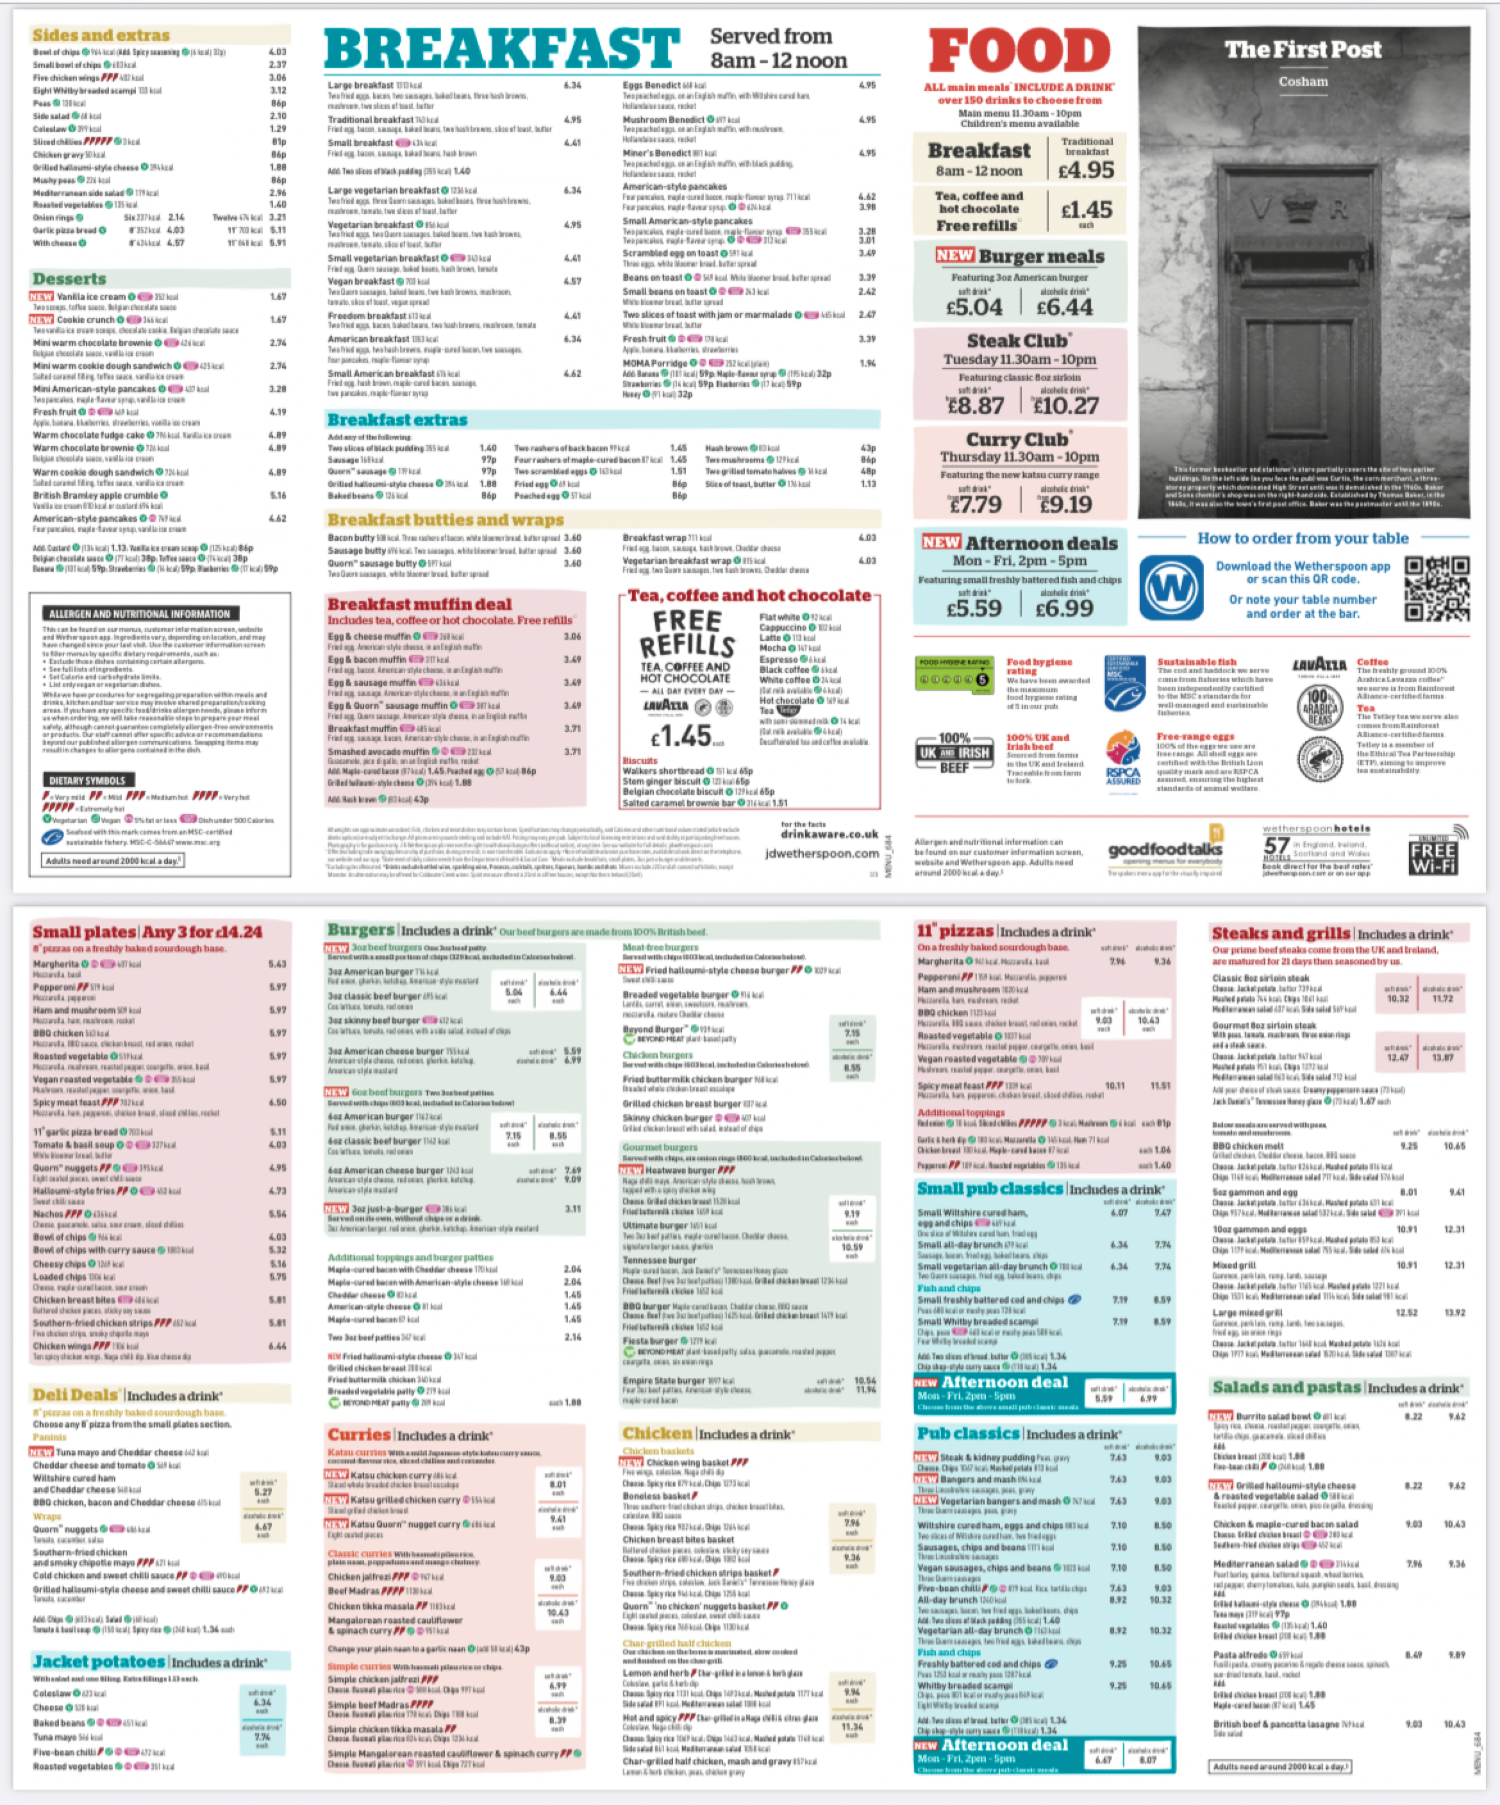 Takeaway Restaurant Menu Page - Wetherspoons – The First Post - Portsmouth